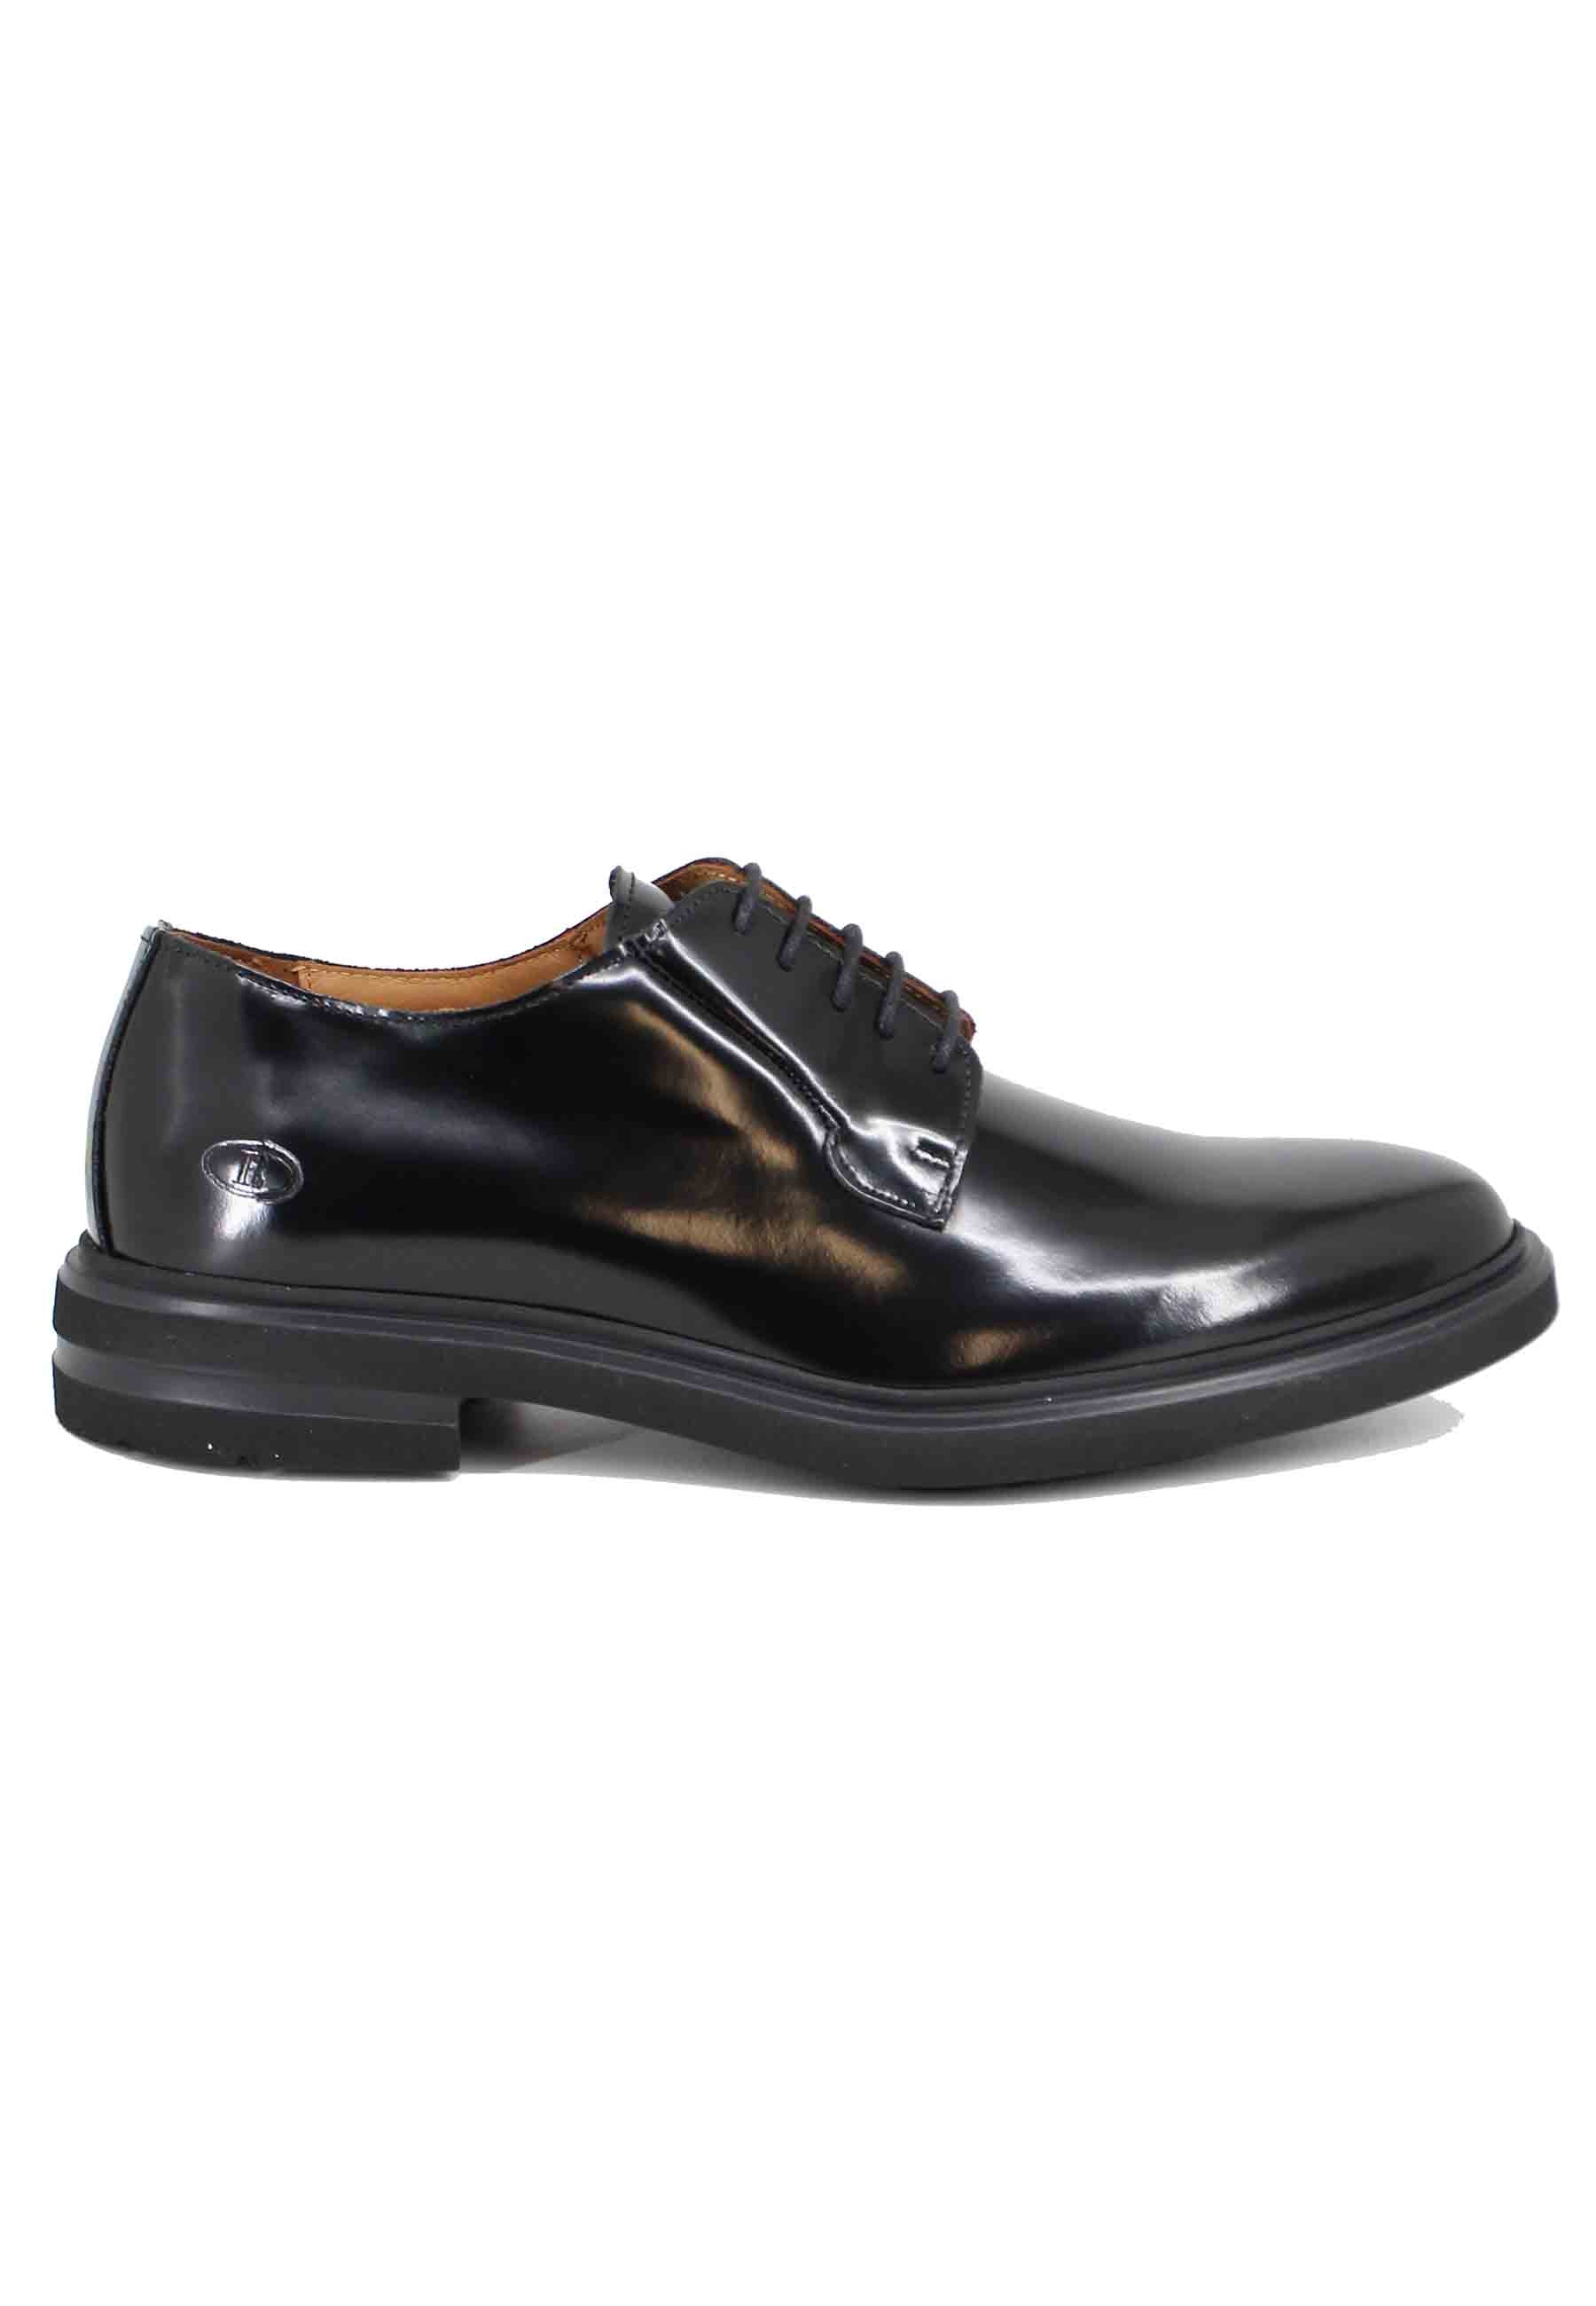 Men's lace-ups in black leather with rubber sole